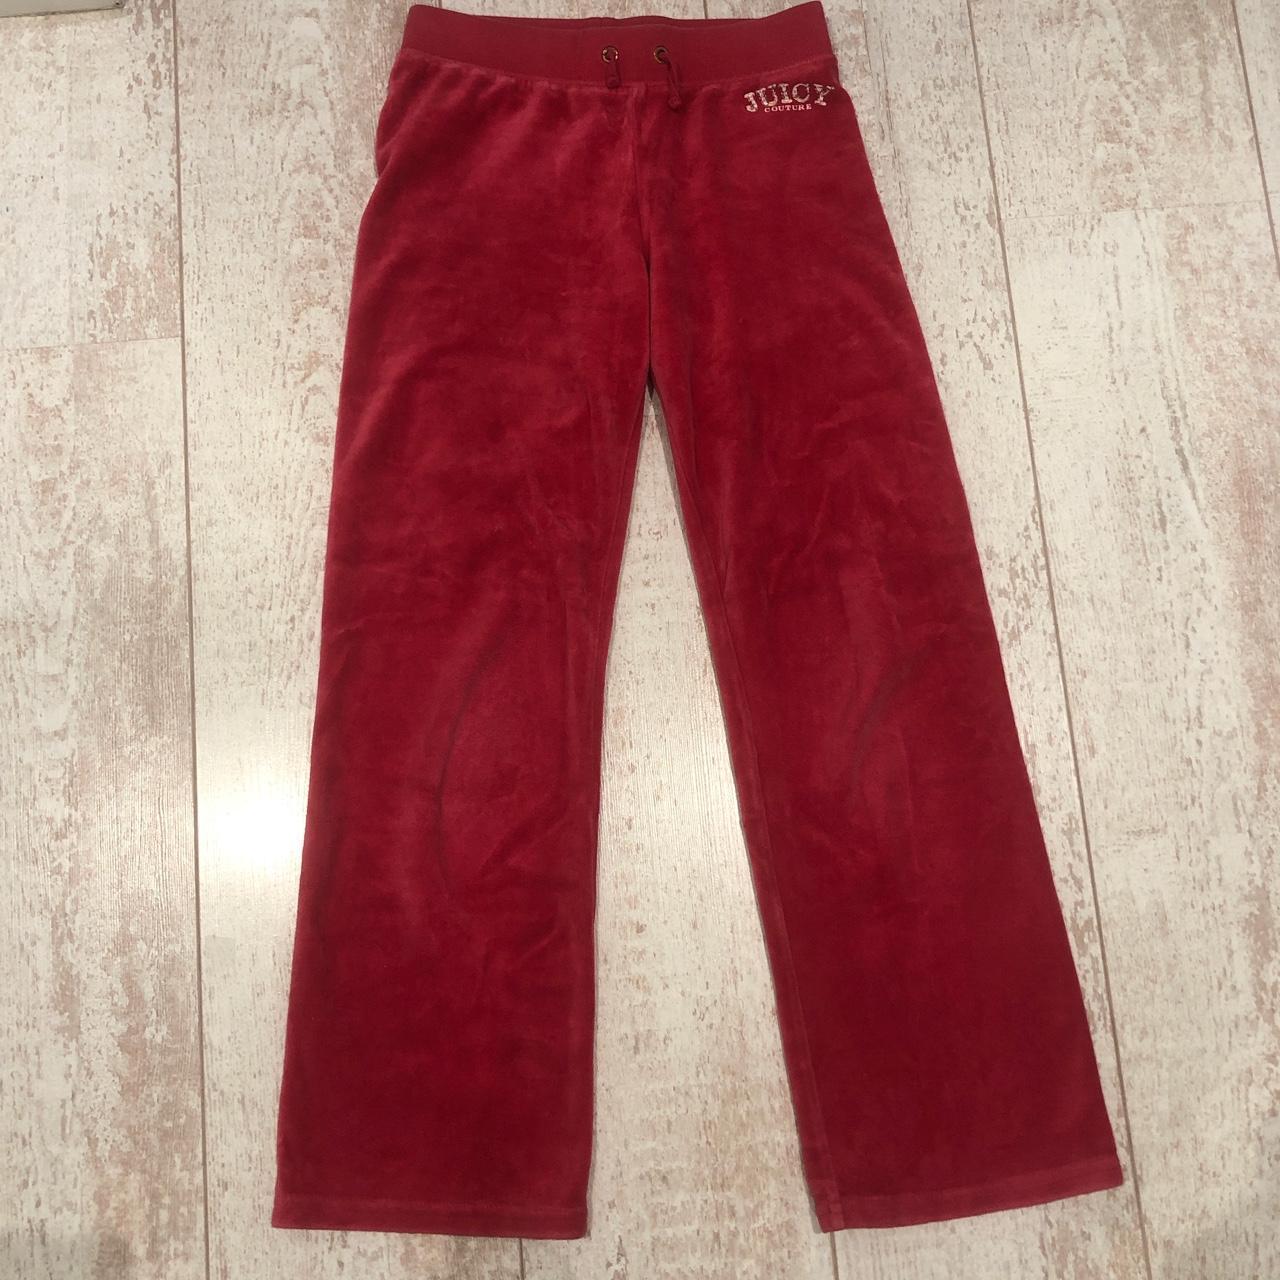 Rare kids stylish red Juicy Couture sweatpants. Low... - Depop